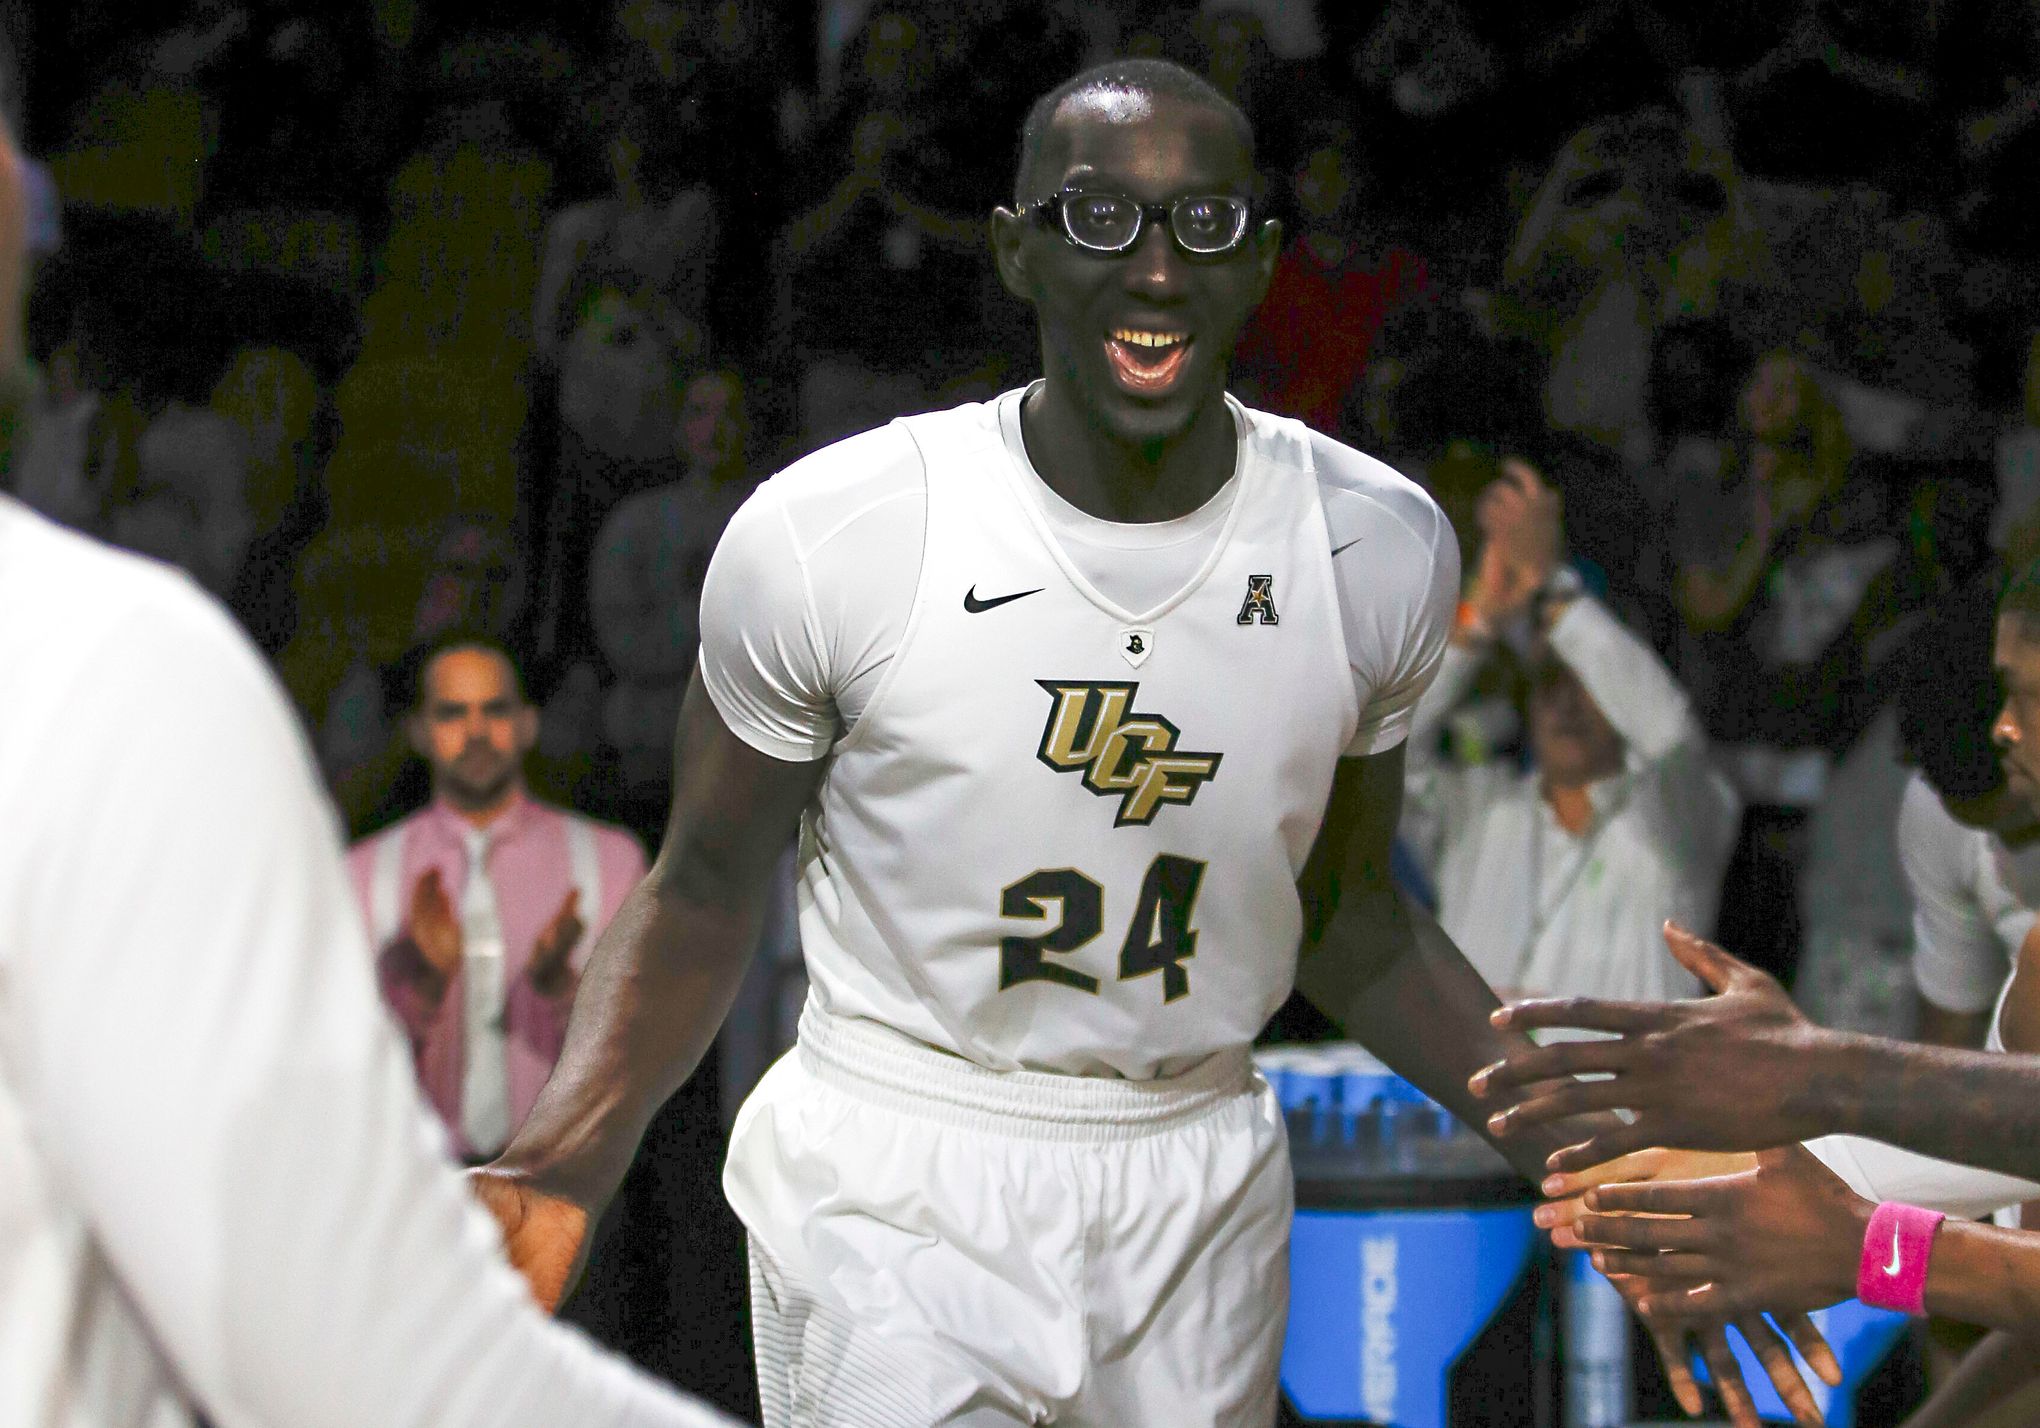 Center of attention - Where Tacko Fall stands in basketball - ESPN